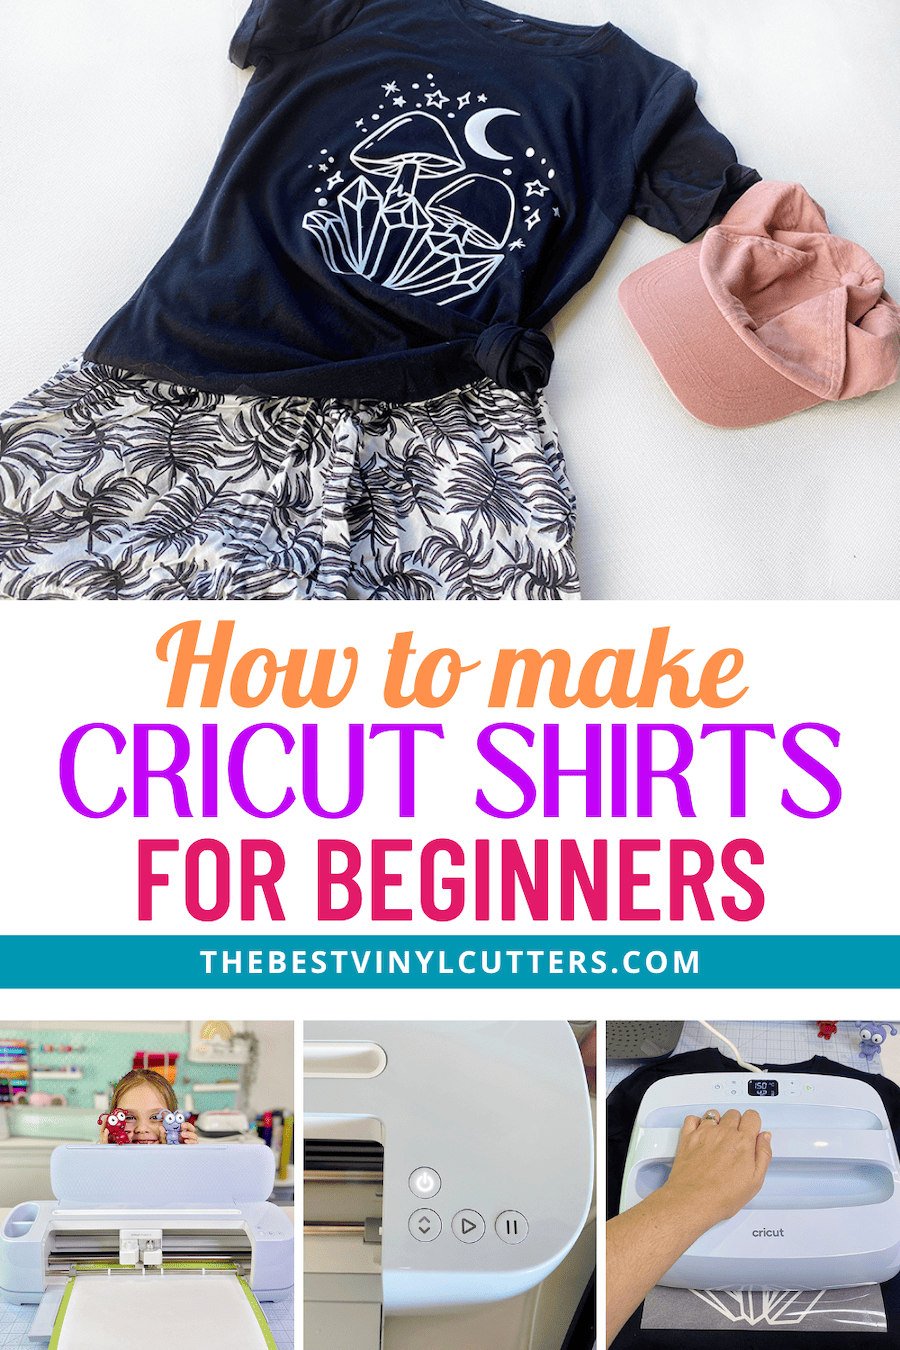 How to make Cricut Shirts for beginners